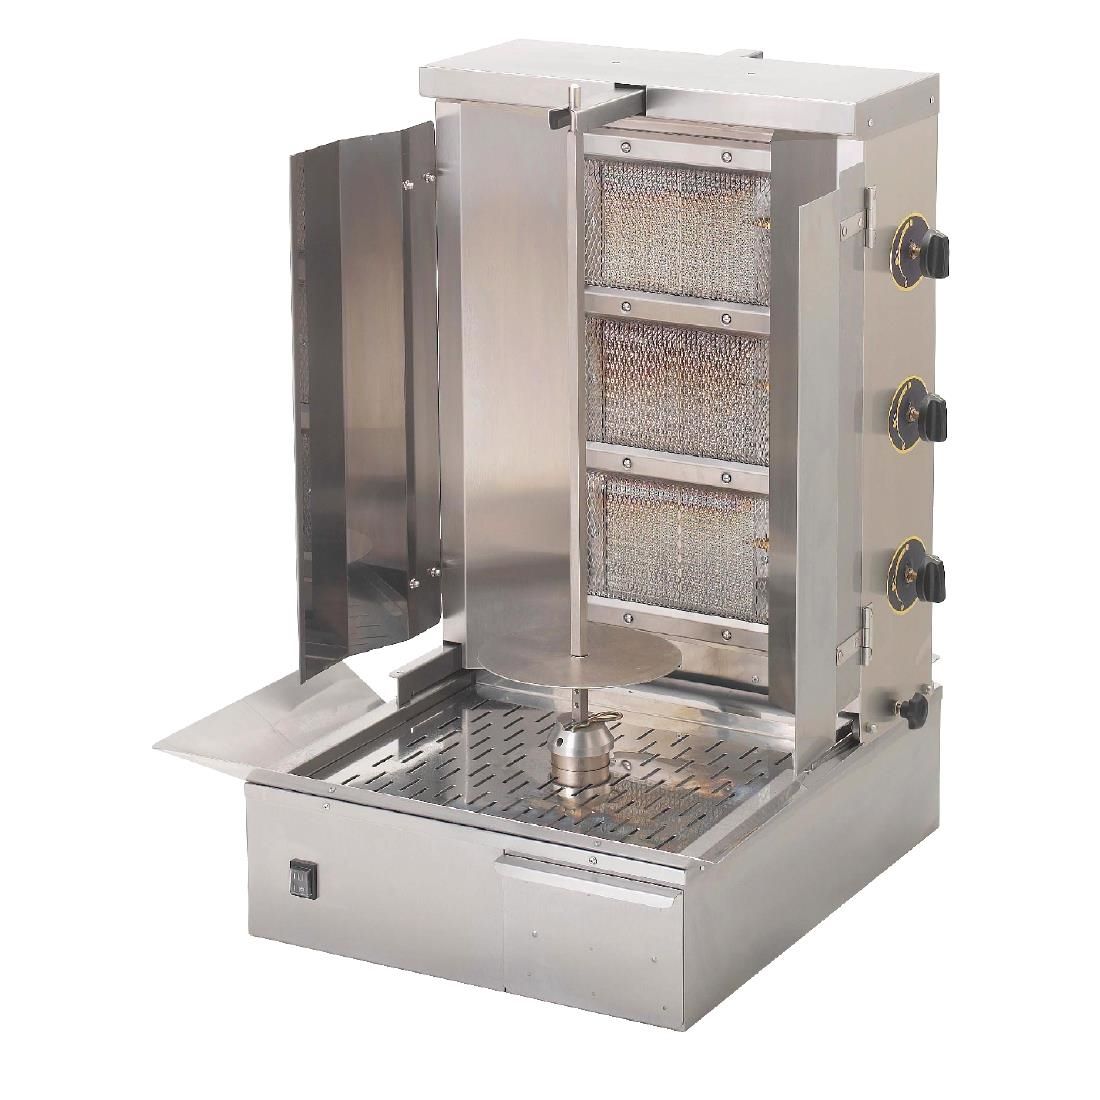 GD349-P Roller Grill LPG Gas Gyros or Kebab Grill GR 60G JD Catering Equipment Solutions Ltd